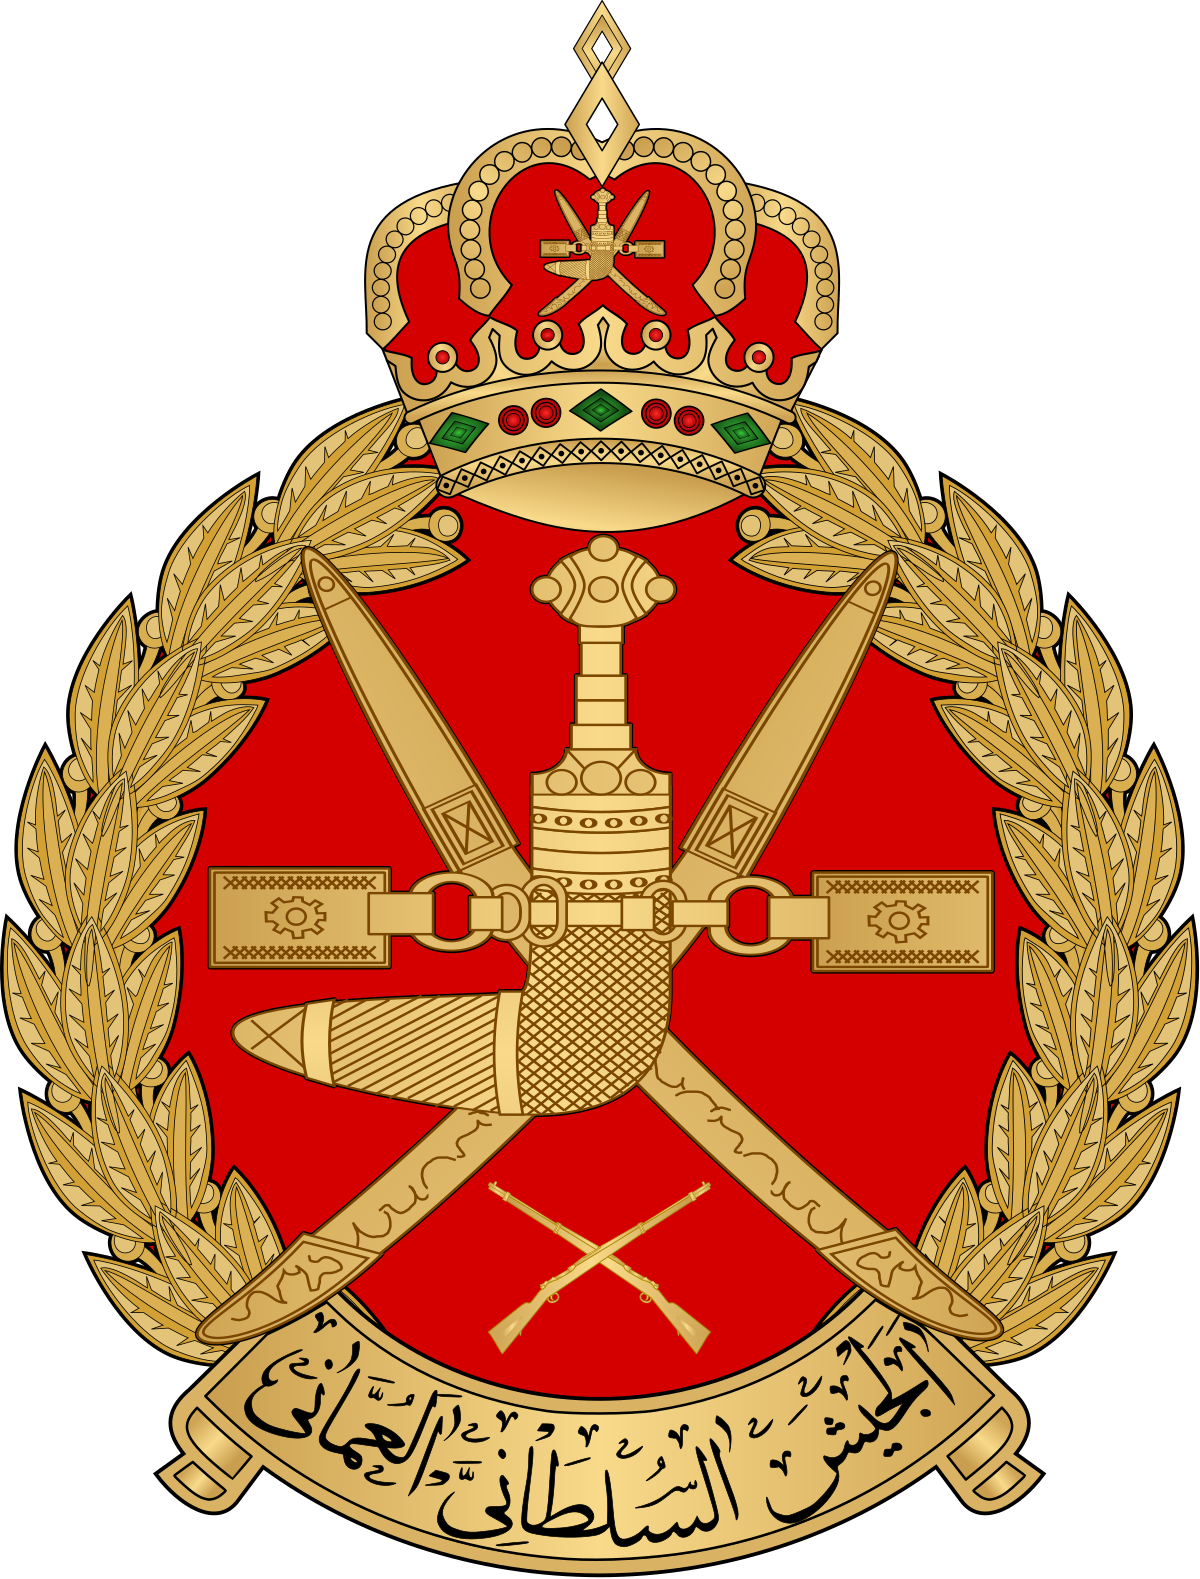 A Gold Emblem With A Crown And Crossed Weapons